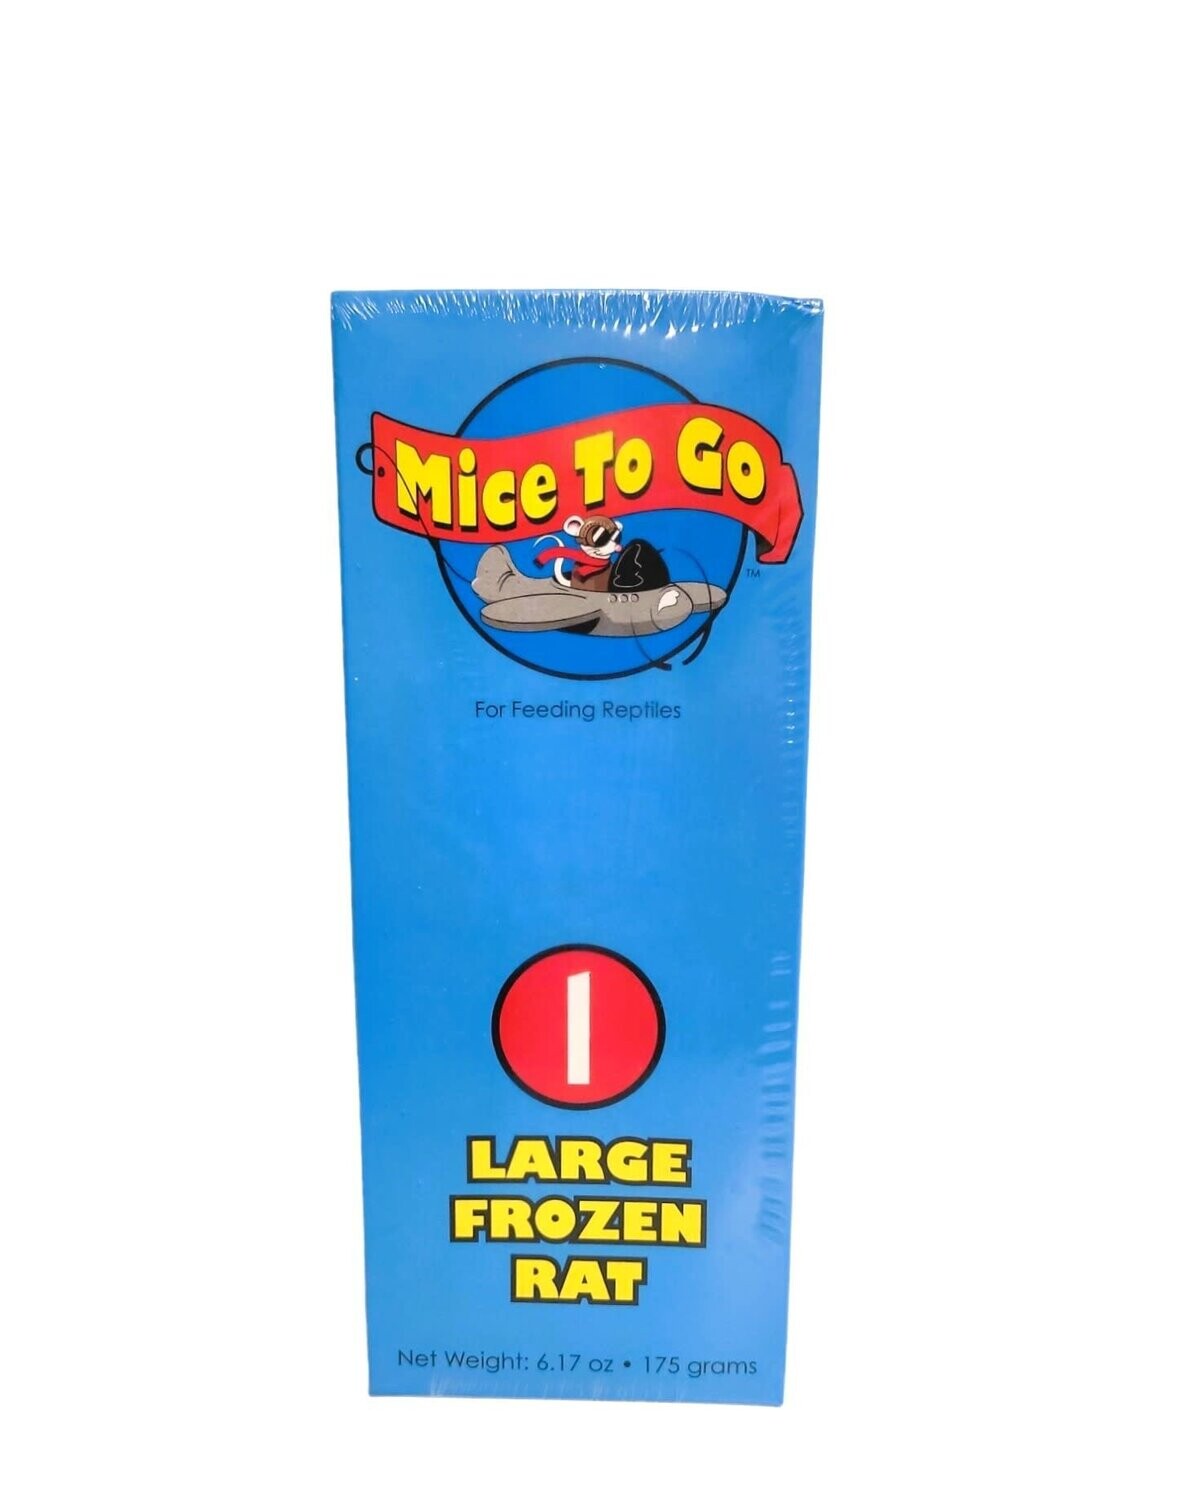 Mice to Go Frozen Large Rat 1 Pack